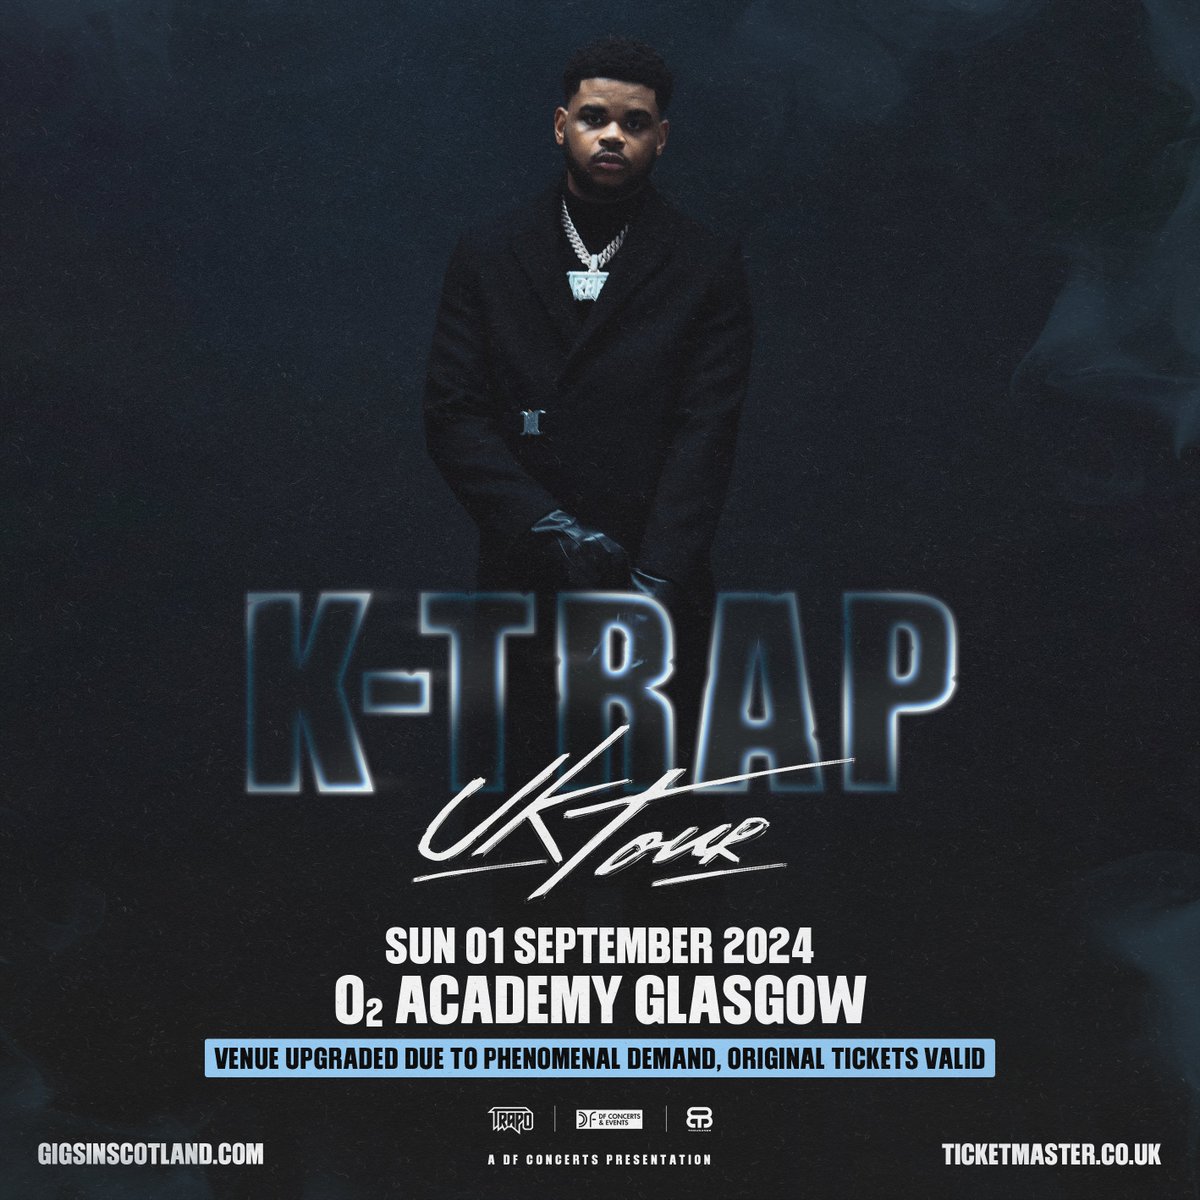 VENUE UPGRADE » The @ktrap19 show originally due to take place at @SWG3glasgow on 1st September has been upgraded to @O2AcademyGla due to phenomenal demand! Original tickets remain valid. Additional tickets on sale now 🔥 MORE INFO ⇾ gigss.co/ktrap